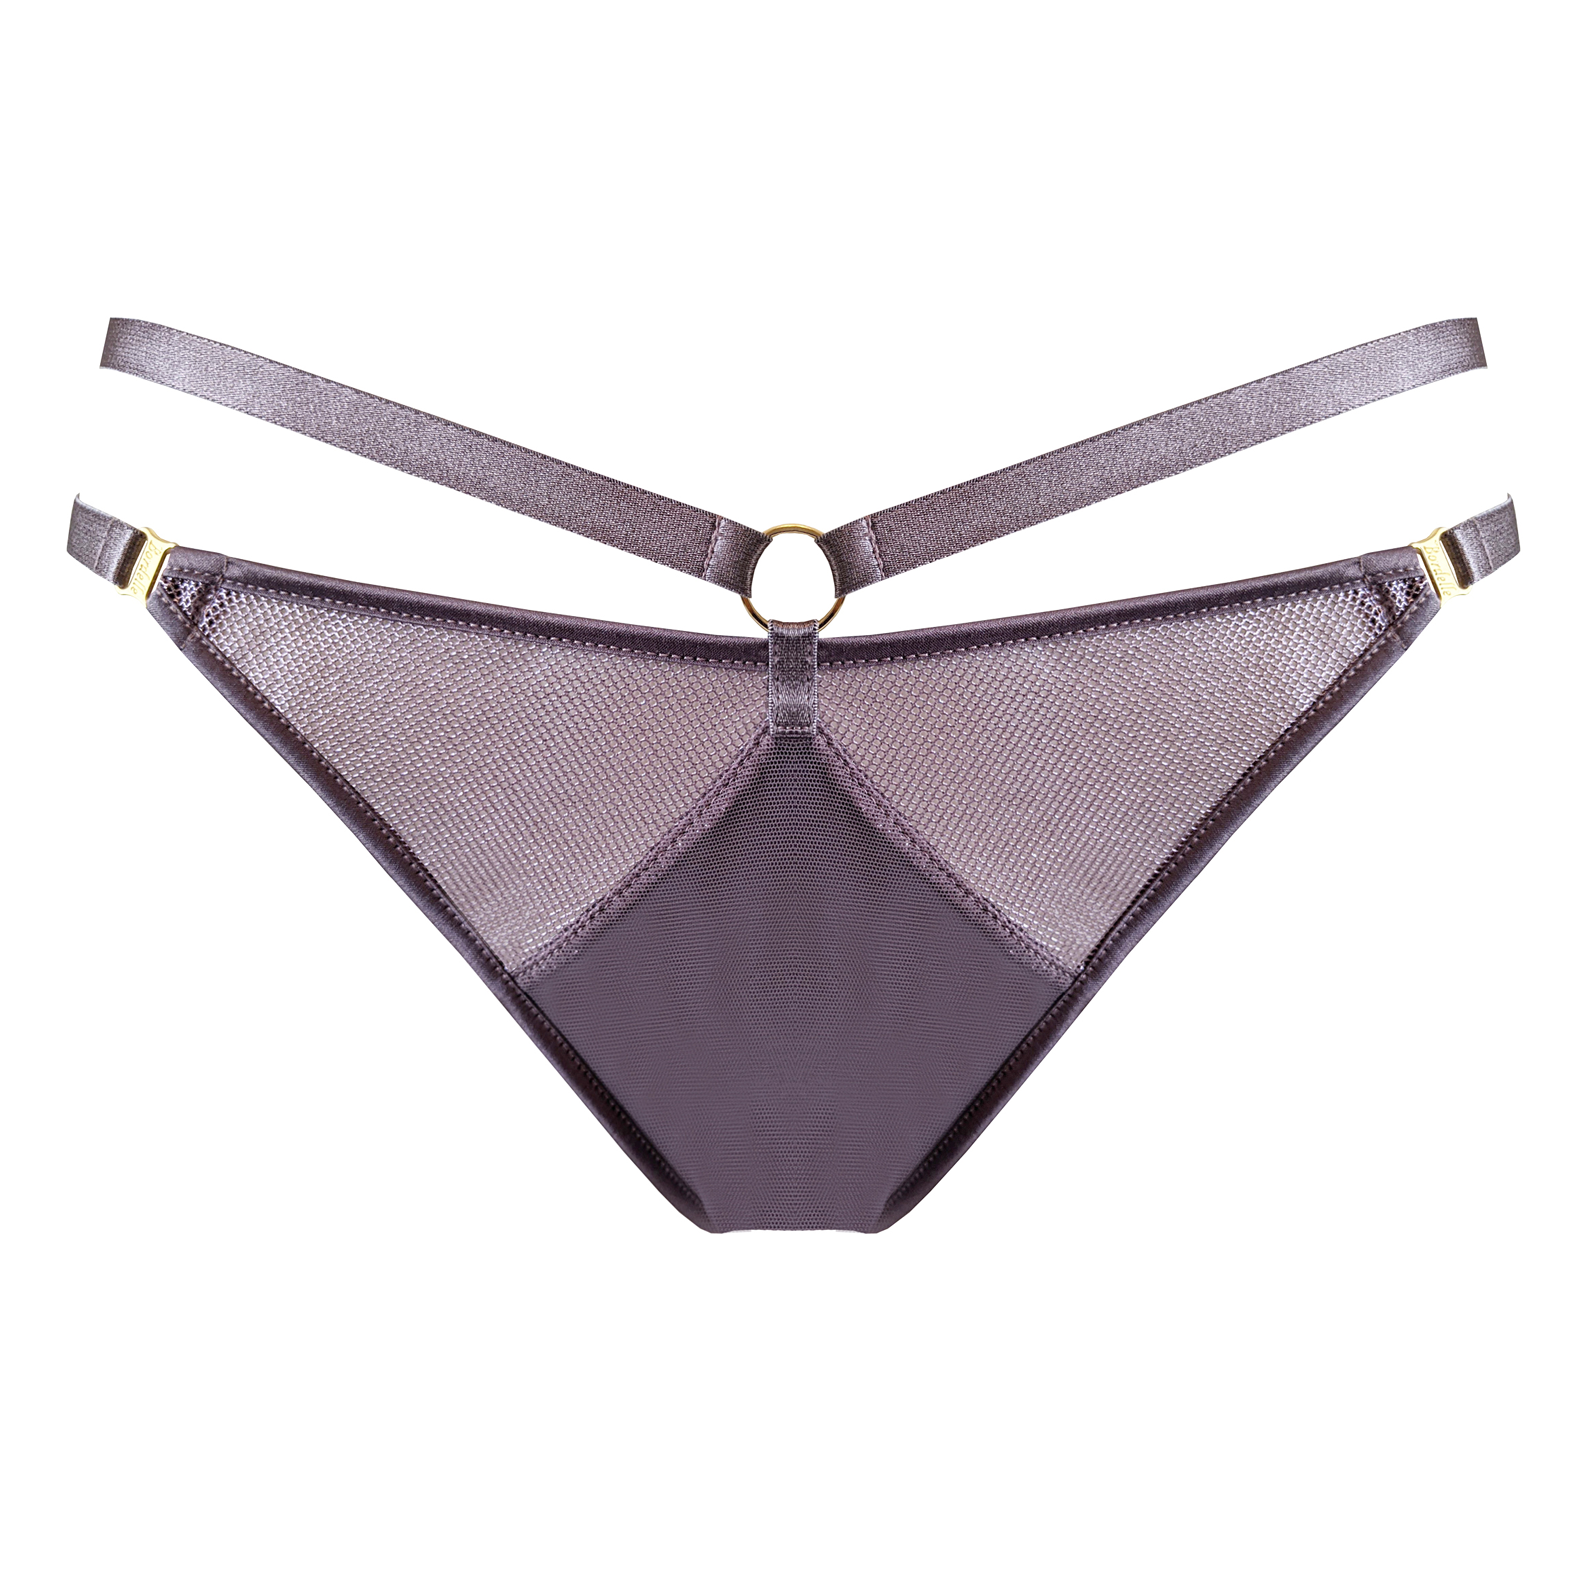 Bordelle Ula strap thong tundra purple sheer shimmer foiled mesh with gold plated o ring detail at front